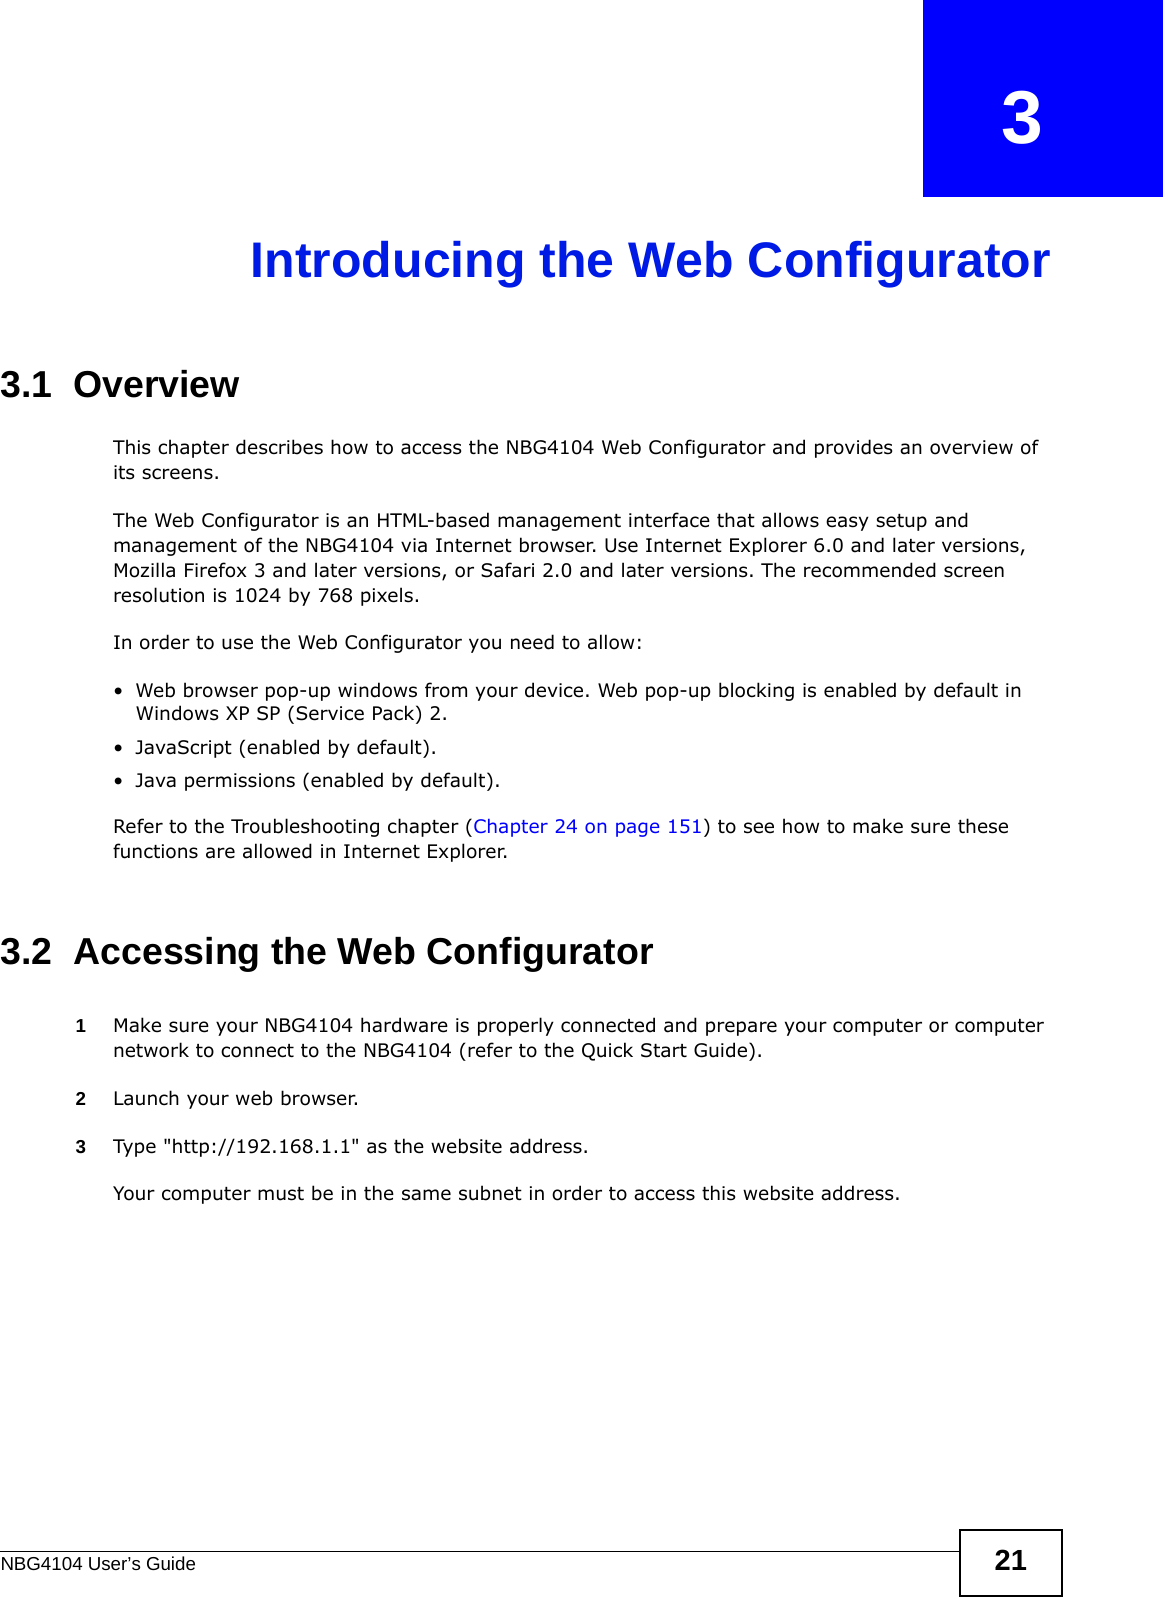 NBG4104 User’s Guide 21CHAPTER   3Introducing the Web Configurator3.1  OverviewThis chapter describes how to access the NBG4104 Web Configurator and provides an overview of its screens.The Web Configurator is an HTML-based management interface that allows easy setup and management of the NBG4104 via Internet browser. Use Internet Explorer 6.0 and later versions, Mozilla Firefox 3 and later versions, or Safari 2.0 and later versions. The recommended screen resolution is 1024 by 768 pixels.In order to use the Web Configurator you need to allow:• Web browser pop-up windows from your device. Web pop-up blocking is enabled by default in Windows XP SP (Service Pack) 2.• JavaScript (enabled by default).• Java permissions (enabled by default).Refer to the Troubleshooting chapter (Chapter 24 on page 151) to see how to make sure these functions are allowed in Internet Explorer.3.2  Accessing the Web Configurator1Make sure your NBG4104 hardware is properly connected and prepare your computer or computer network to connect to the NBG4104 (refer to the Quick Start Guide).2Launch your web browser.3Type &quot;http://192.168.1.1&quot; as the website address. Your computer must be in the same subnet in order to access this website address.